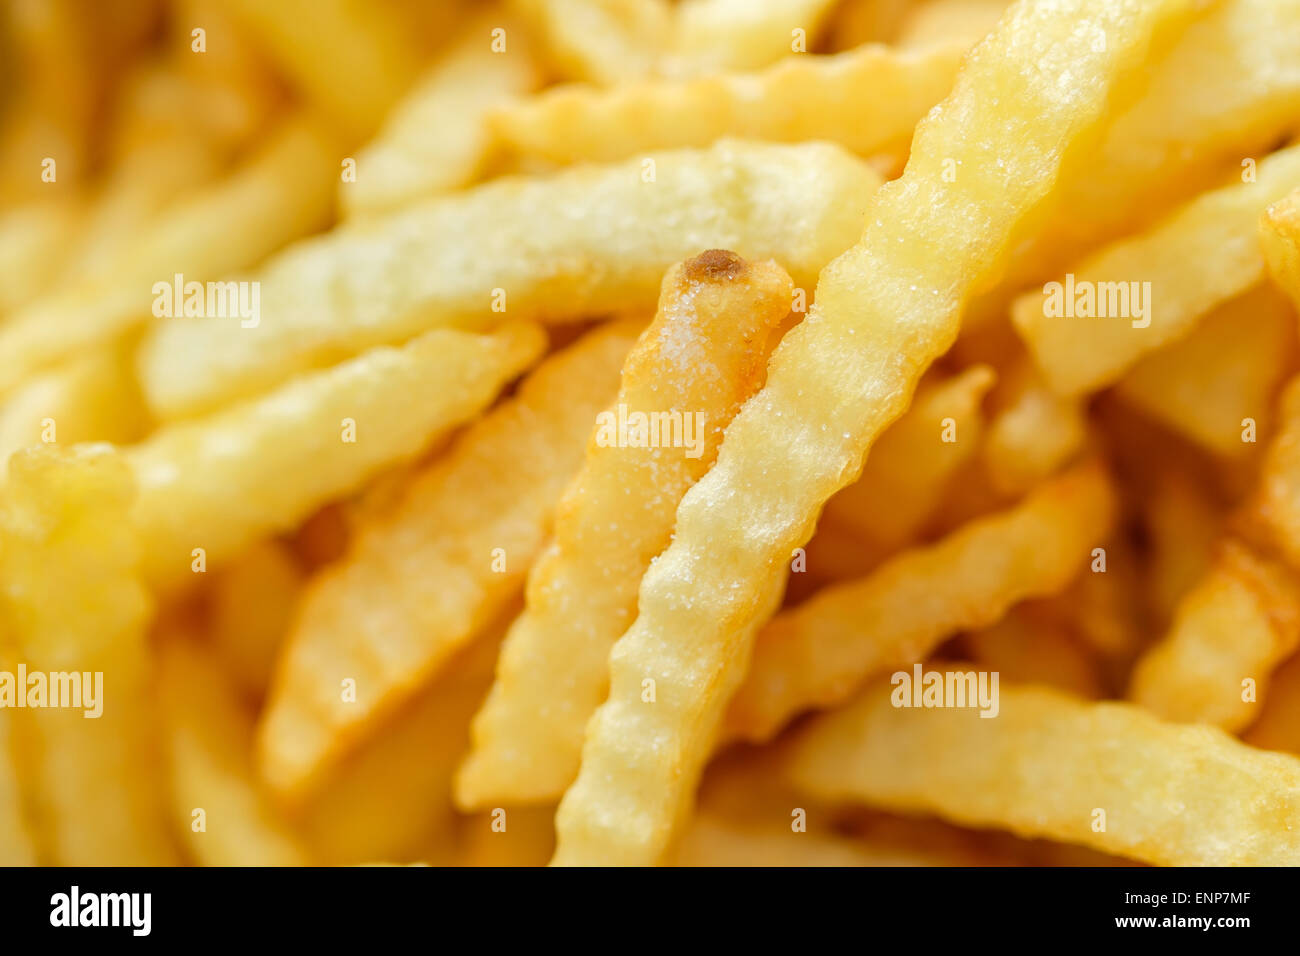 french fries Stock Photo